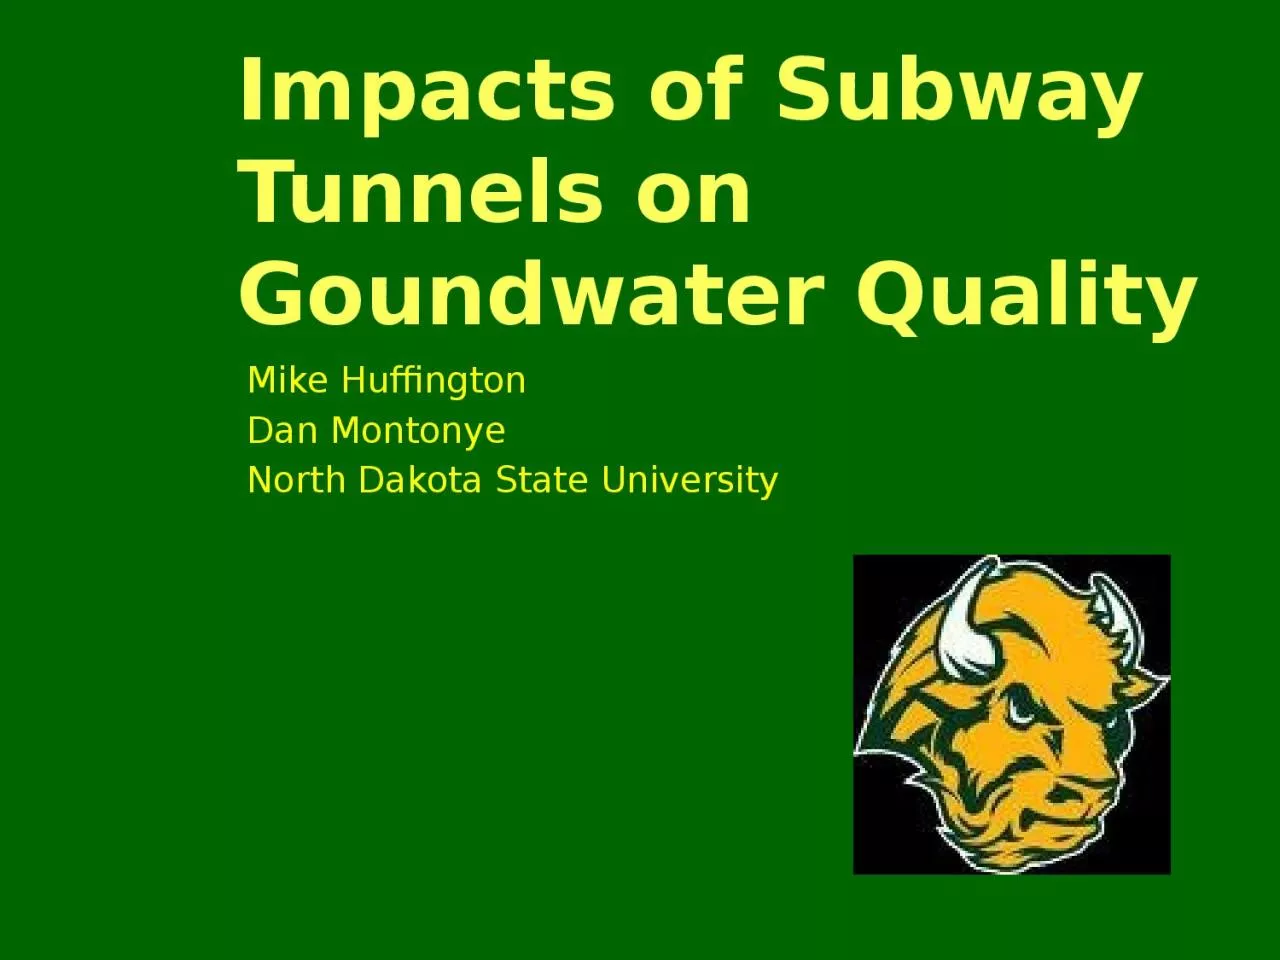 Impacts of Subway Tunnels on